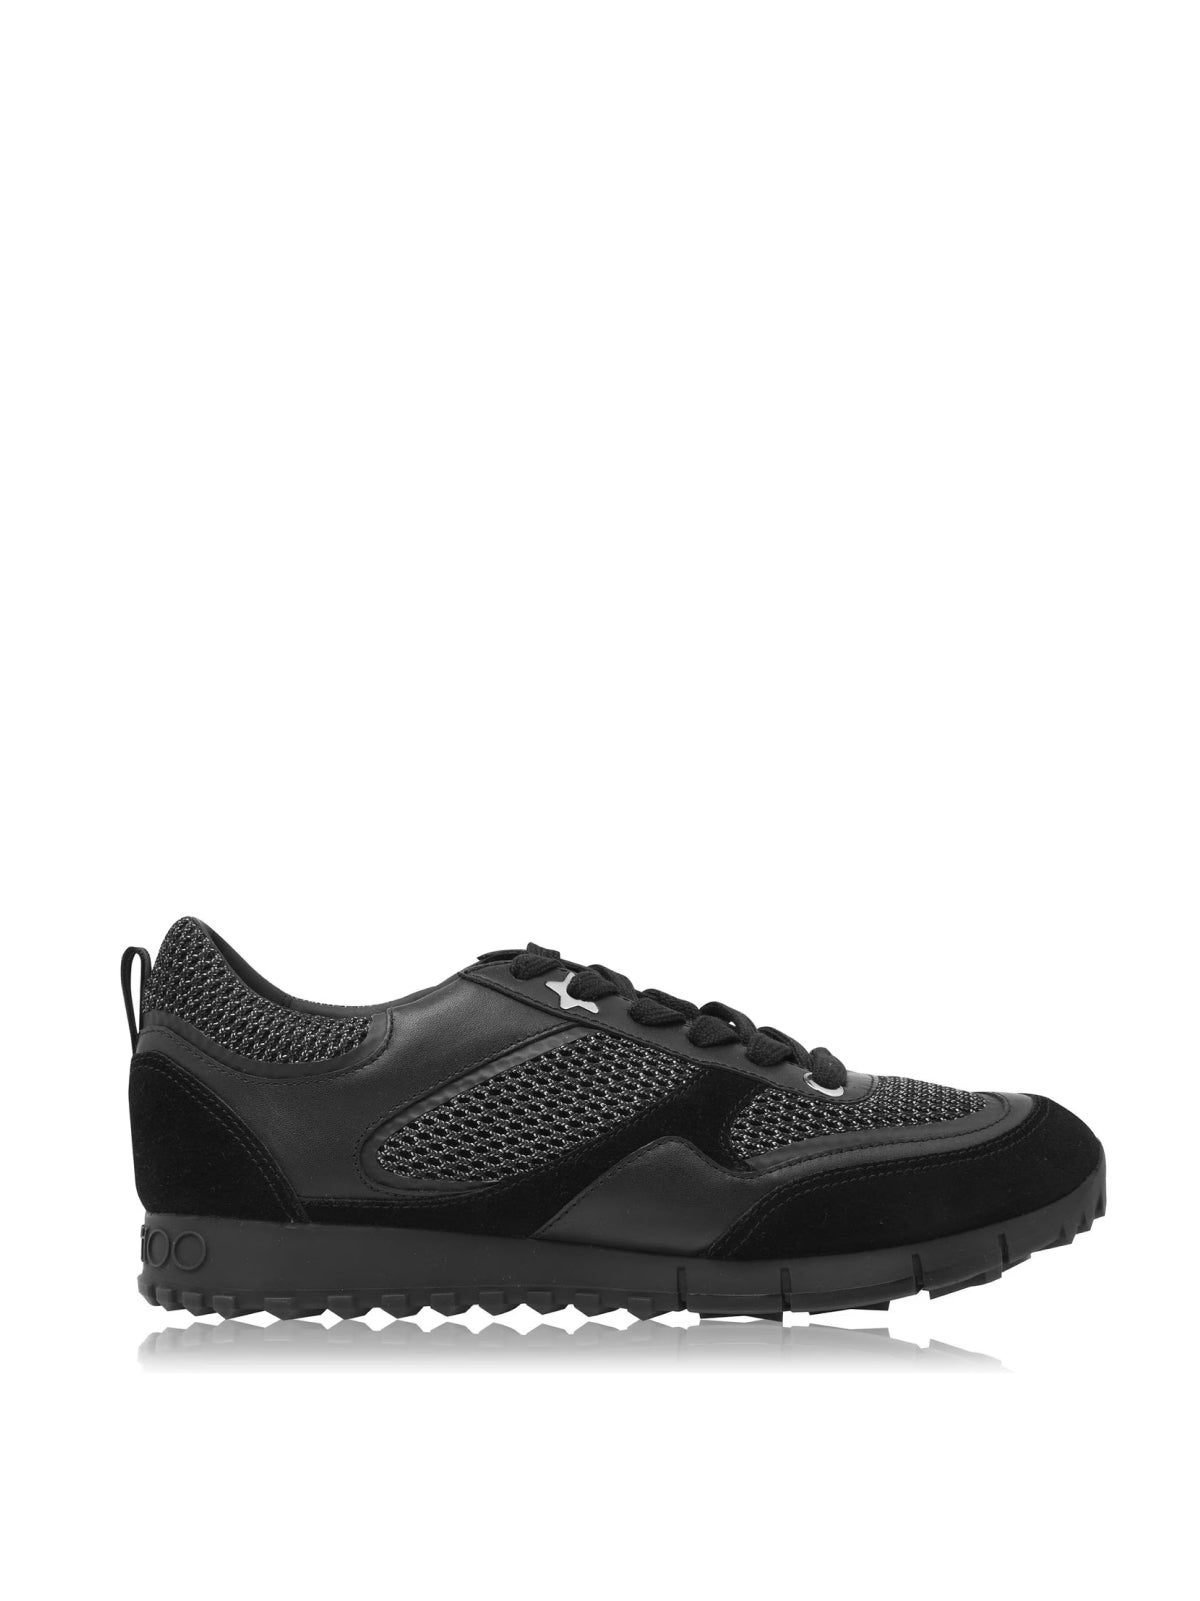 Jimmy Choo-OUTLET-SALE-Java Low Top Sneakers-ARCHIVIST